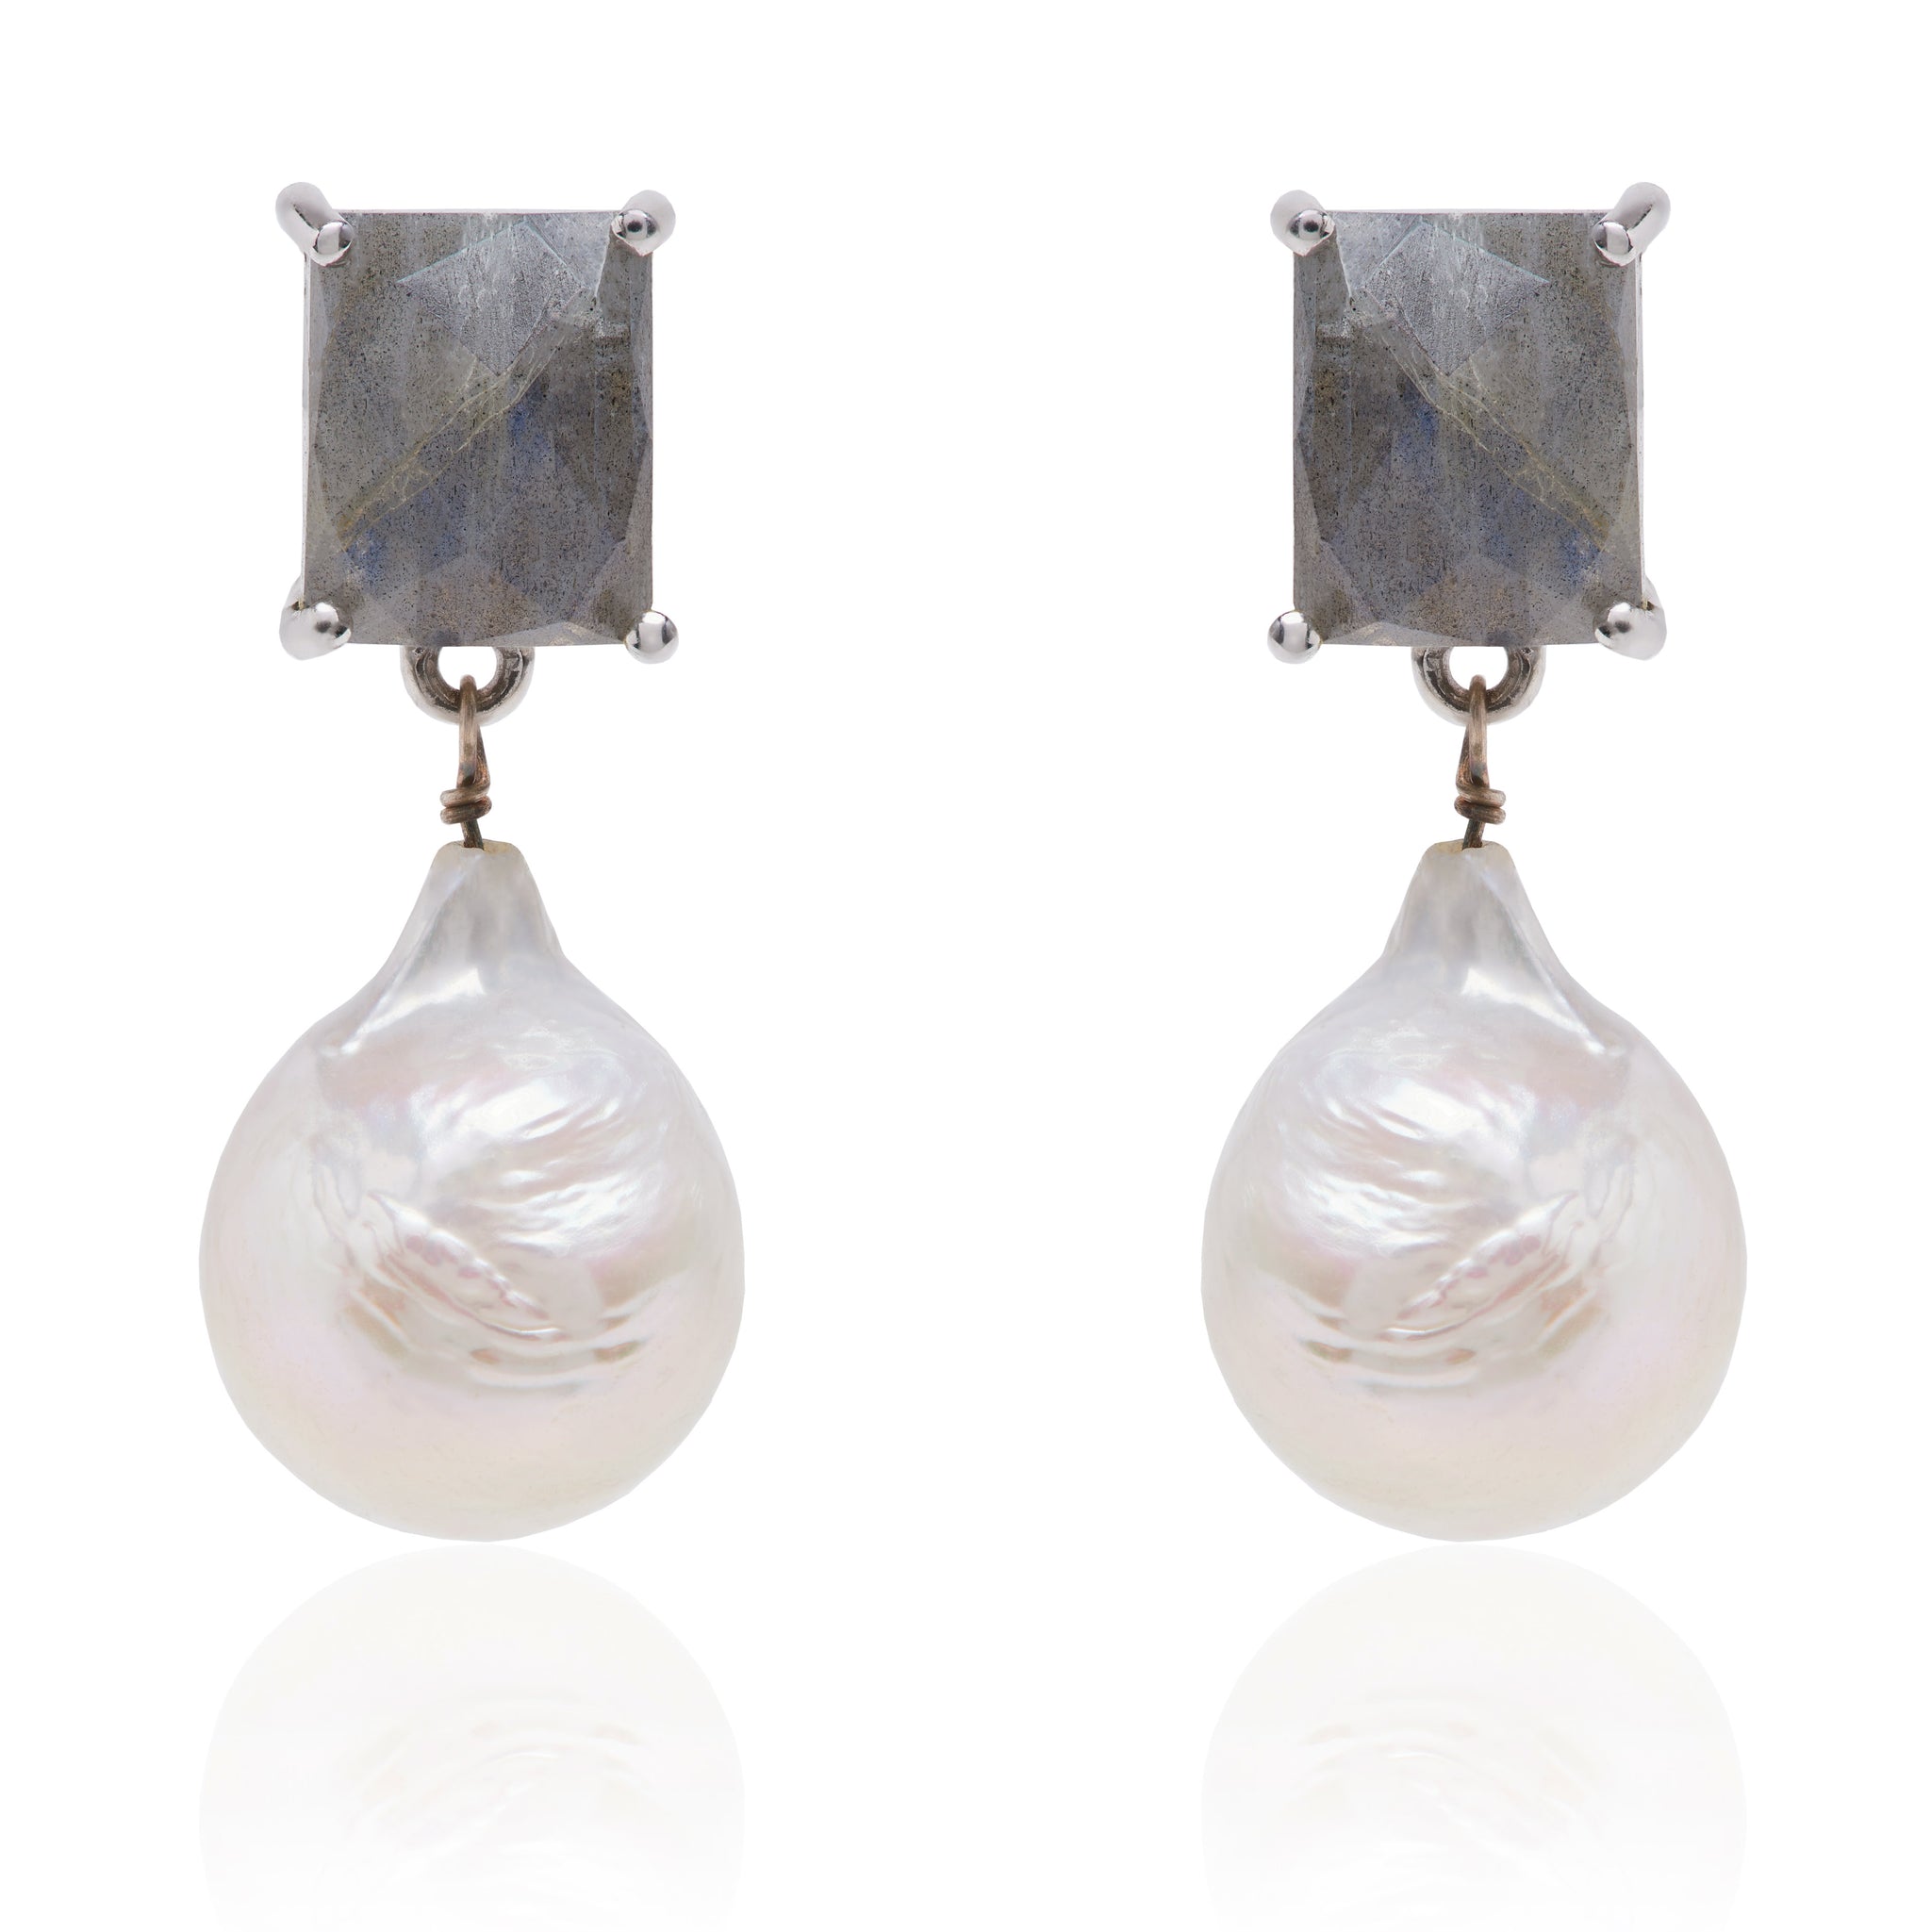 Labradorite and baroque Pearl earrings in sterling silver